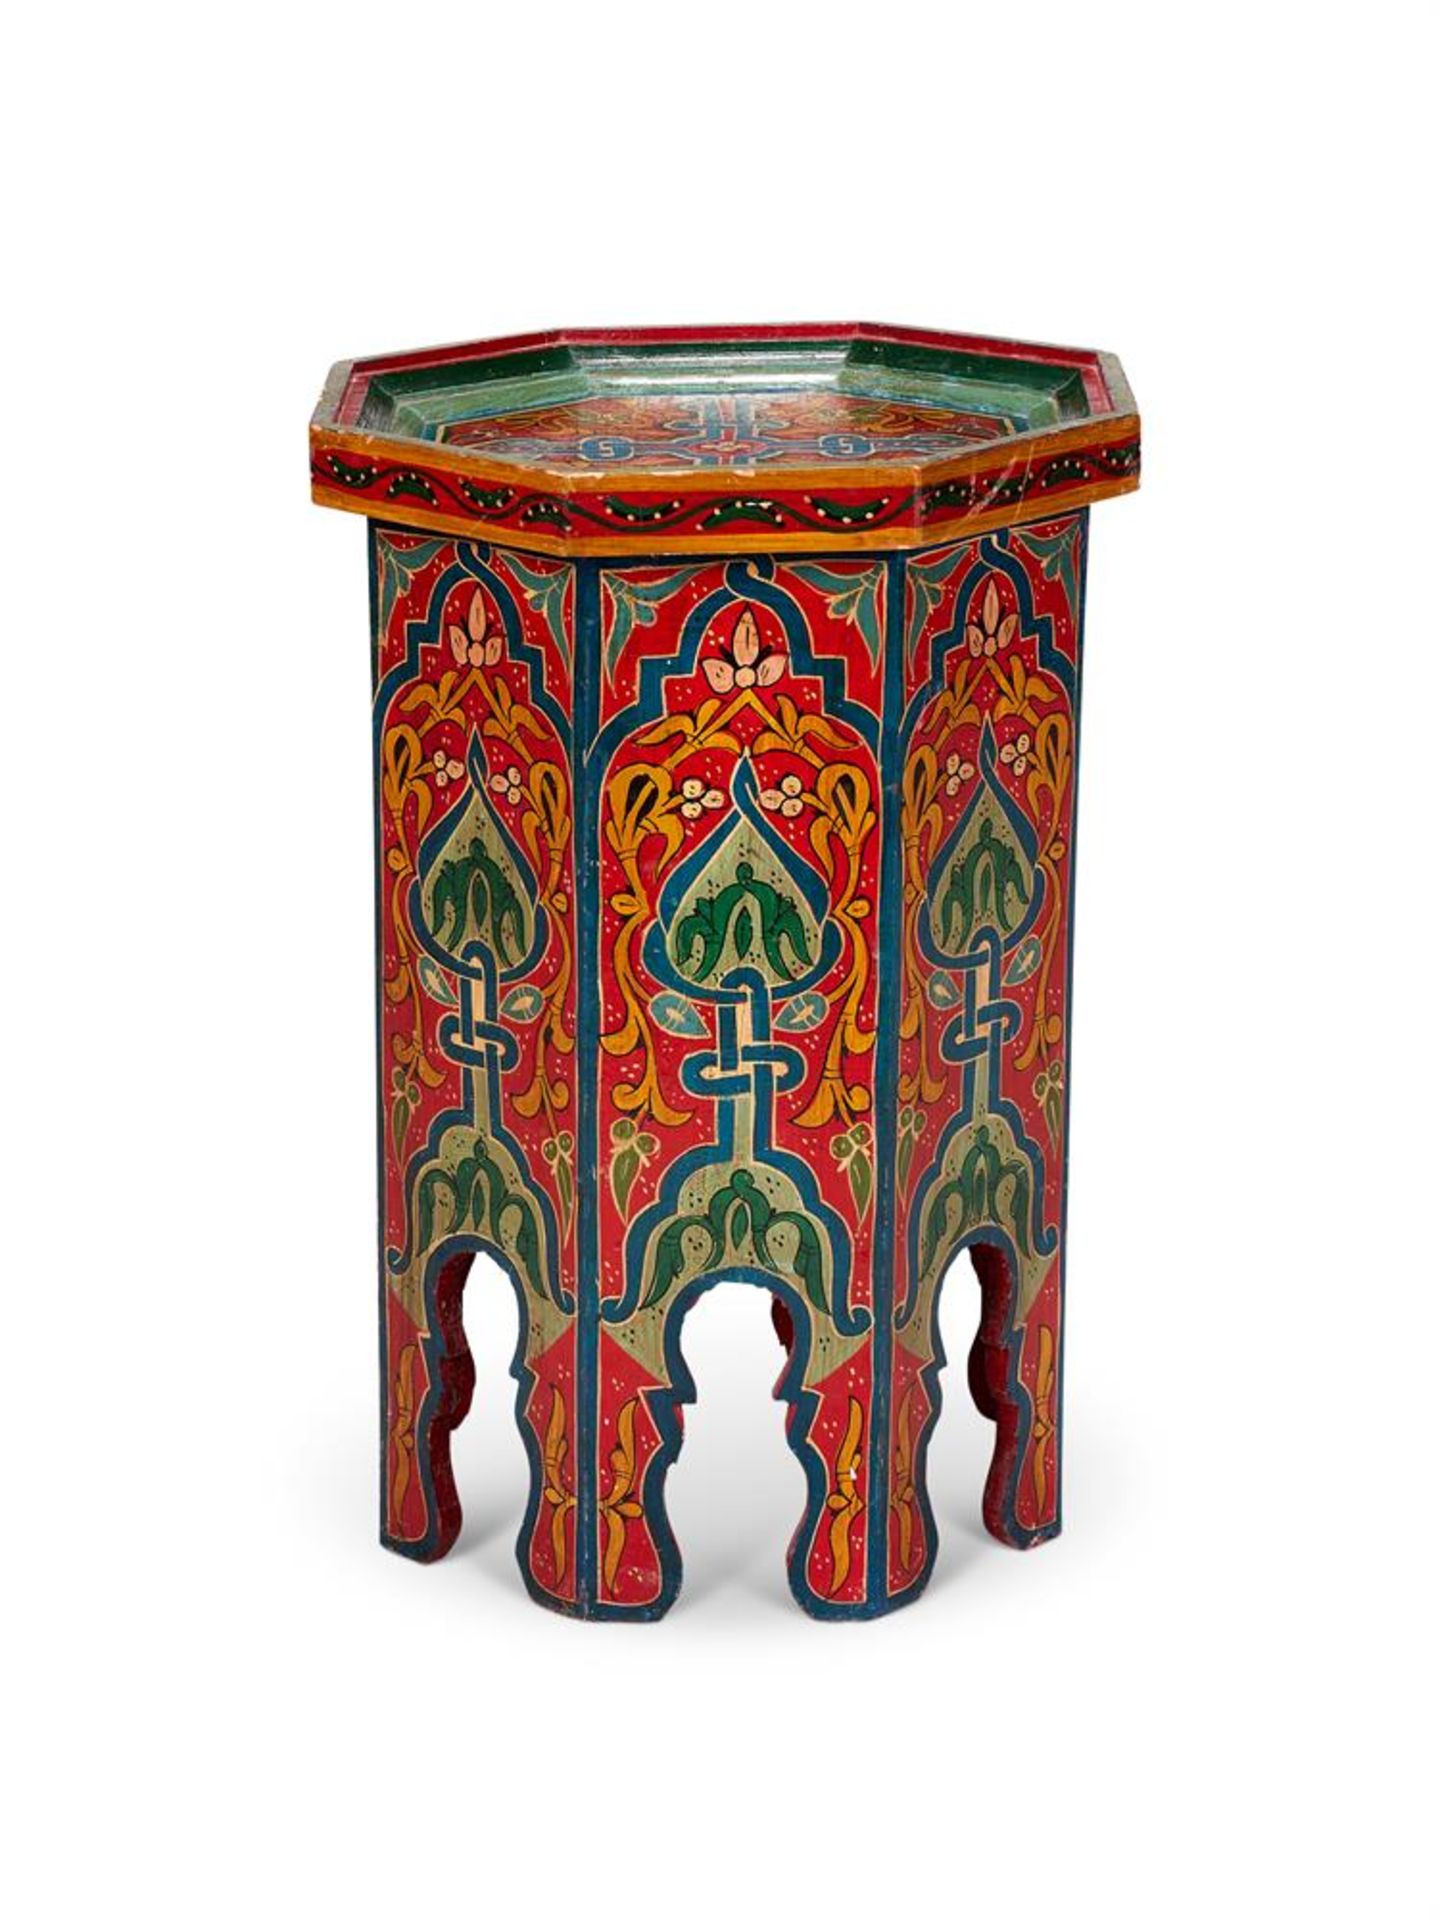 A MOROCCAN PAINTED OCTAGONAL OCCASIONAL TABLE, 20TH CENTURY